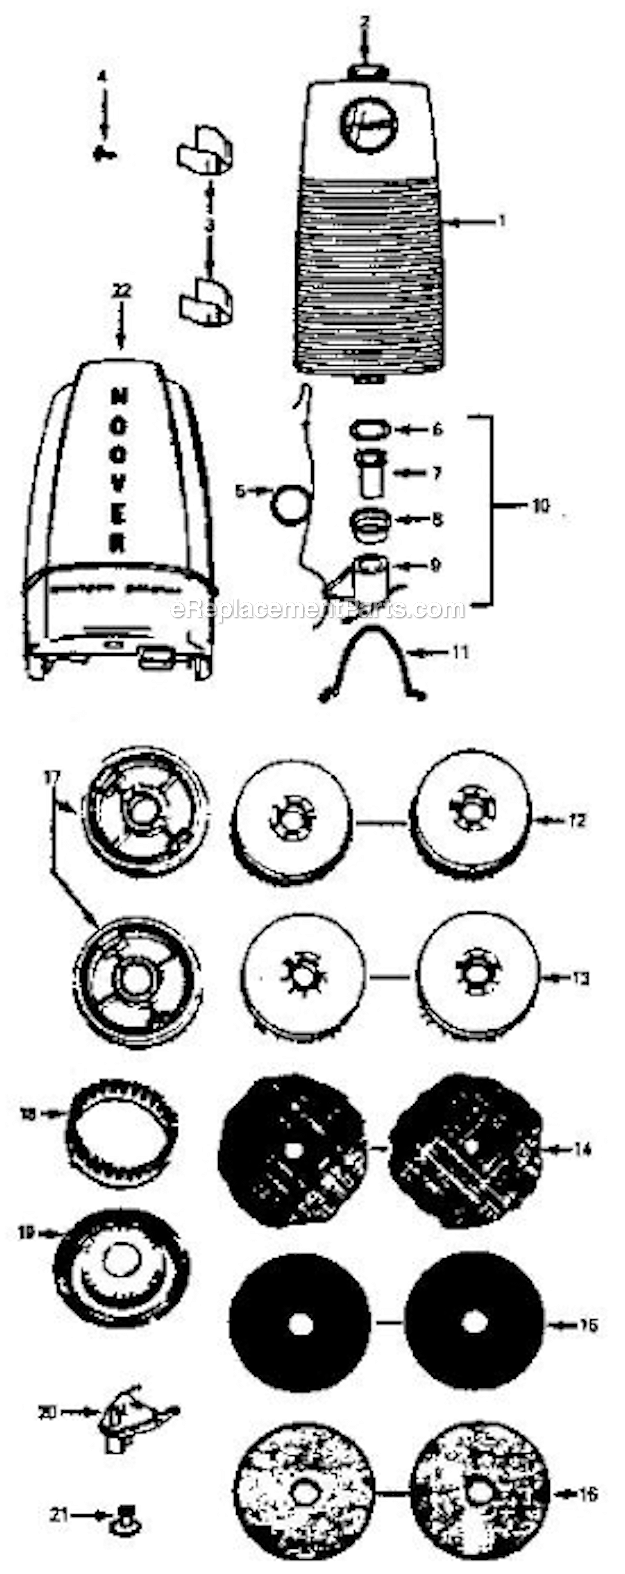 Hoover 5450 Scrubber Motor_And_Housing Diagram